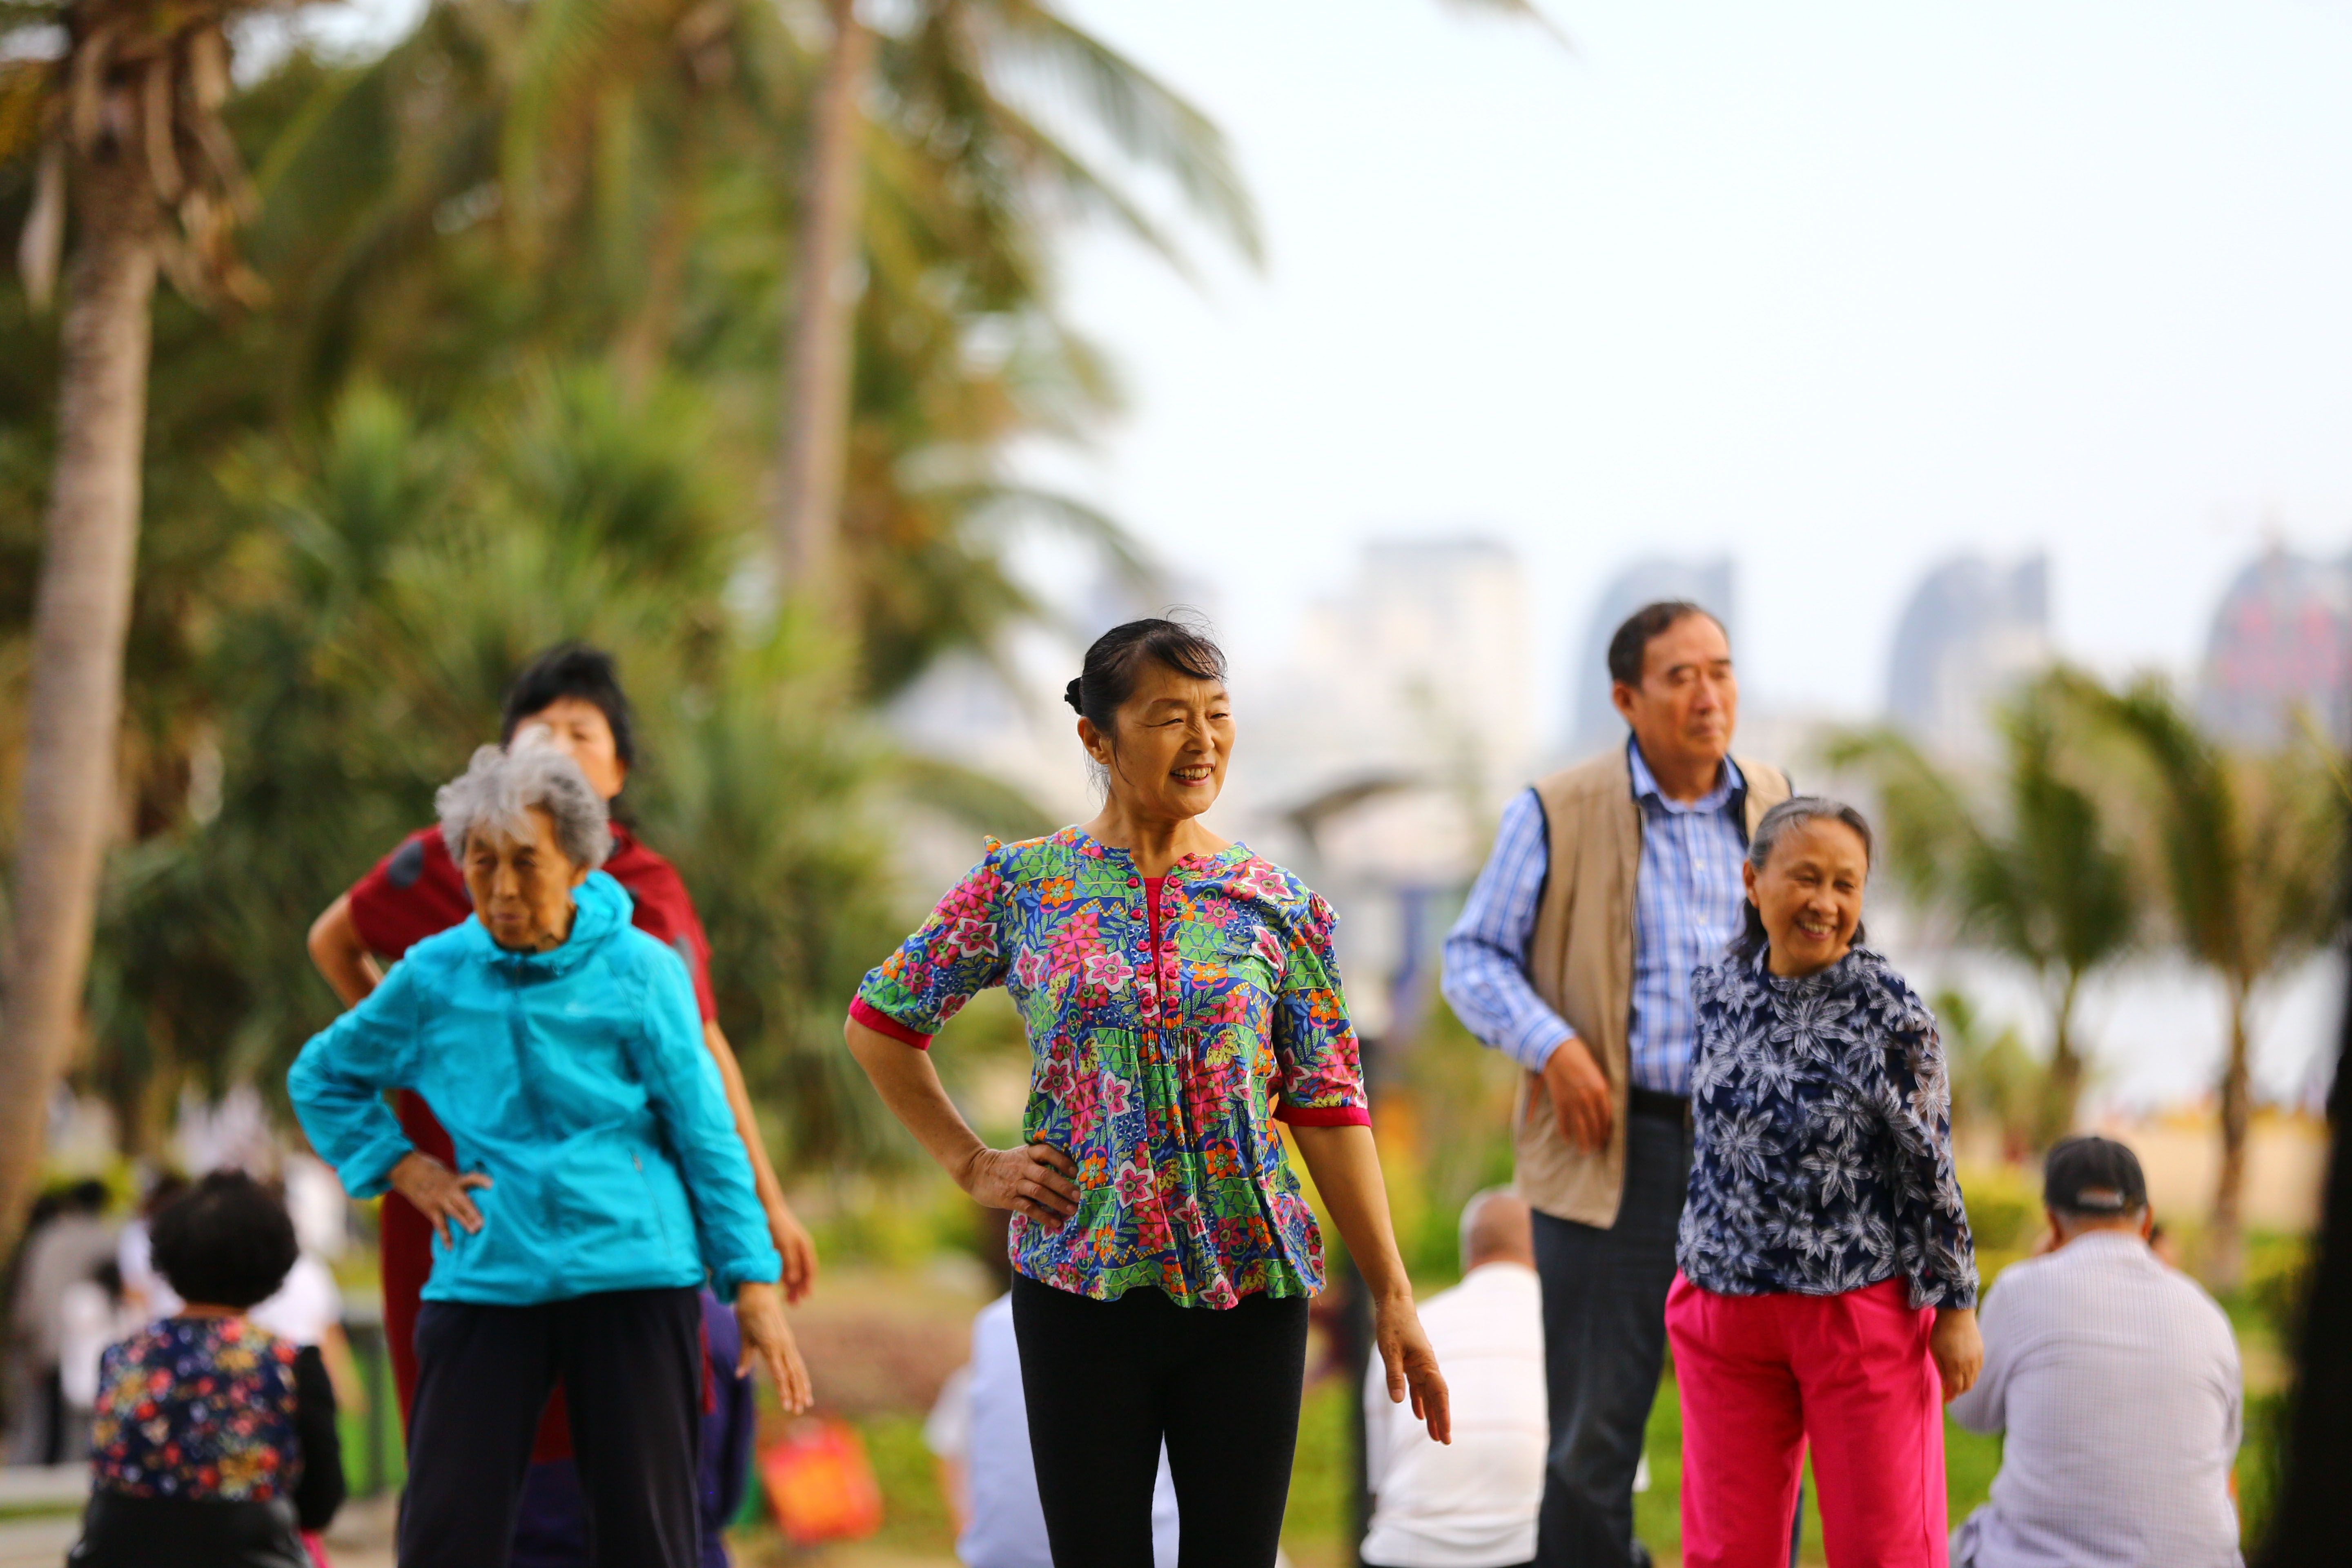 Elderly people walk along the beach in Sanya in China’s Hainan province in February 2017. The island province is fast becoming known as “China’s Florida”, drawing masses of retirees fleeing the biting cold of their hometowns. Photo: AFP